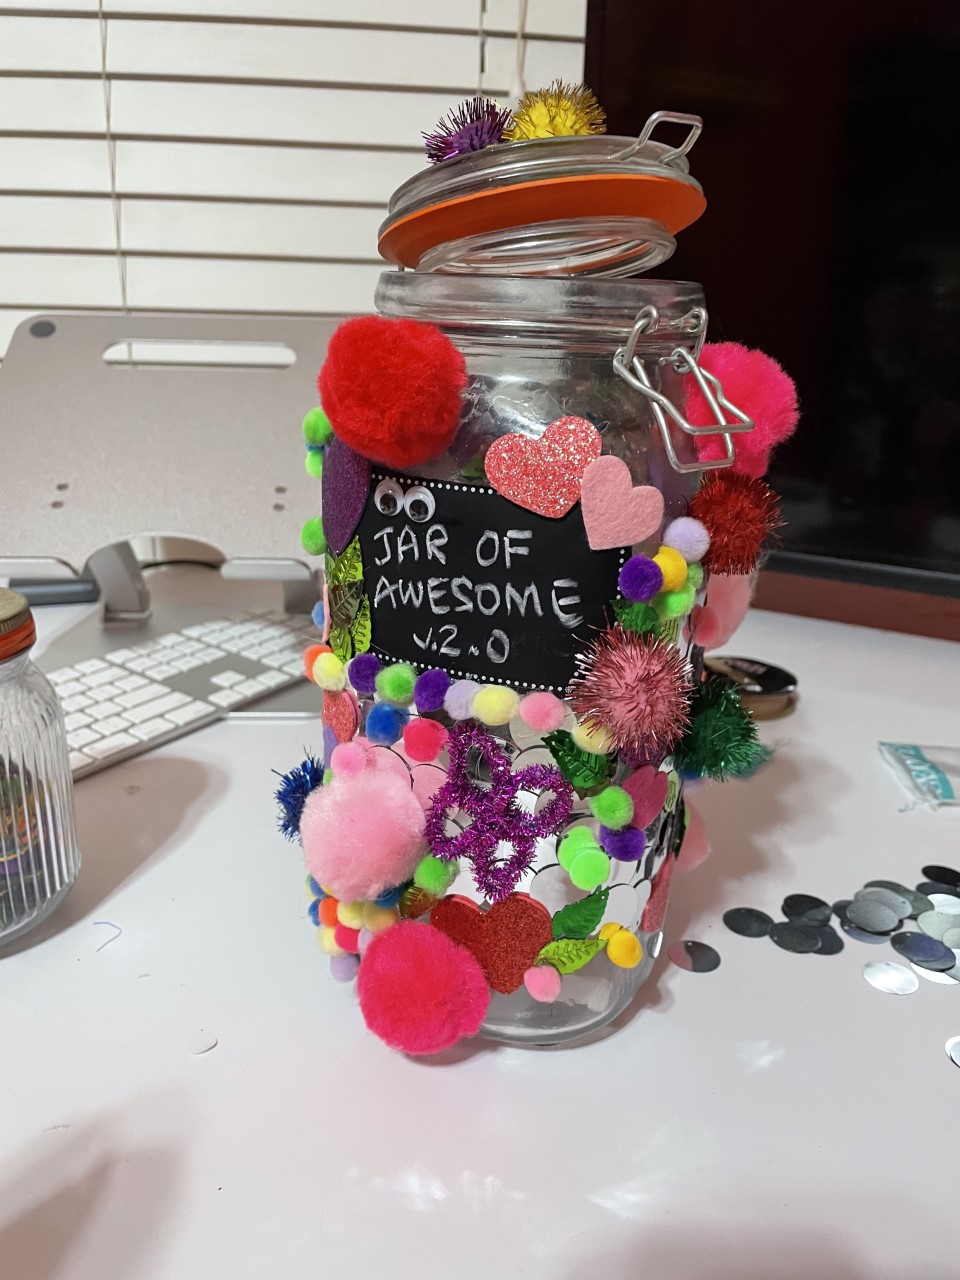 An example of an awesome jar